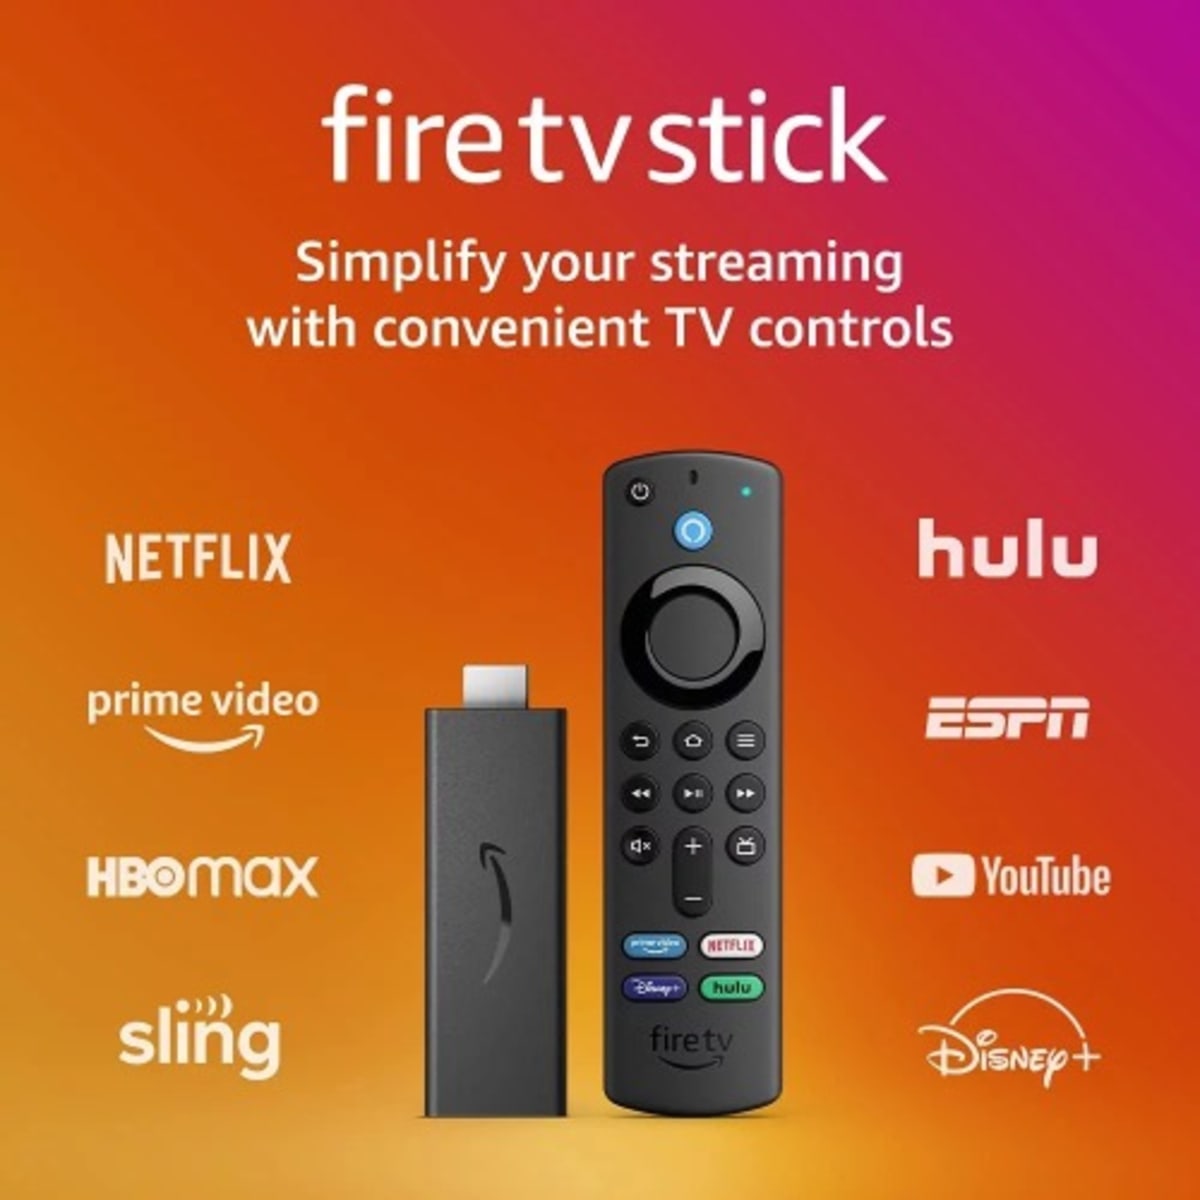 Fire Tv Stick Streaming Media Player - With Alexa Voice Remote